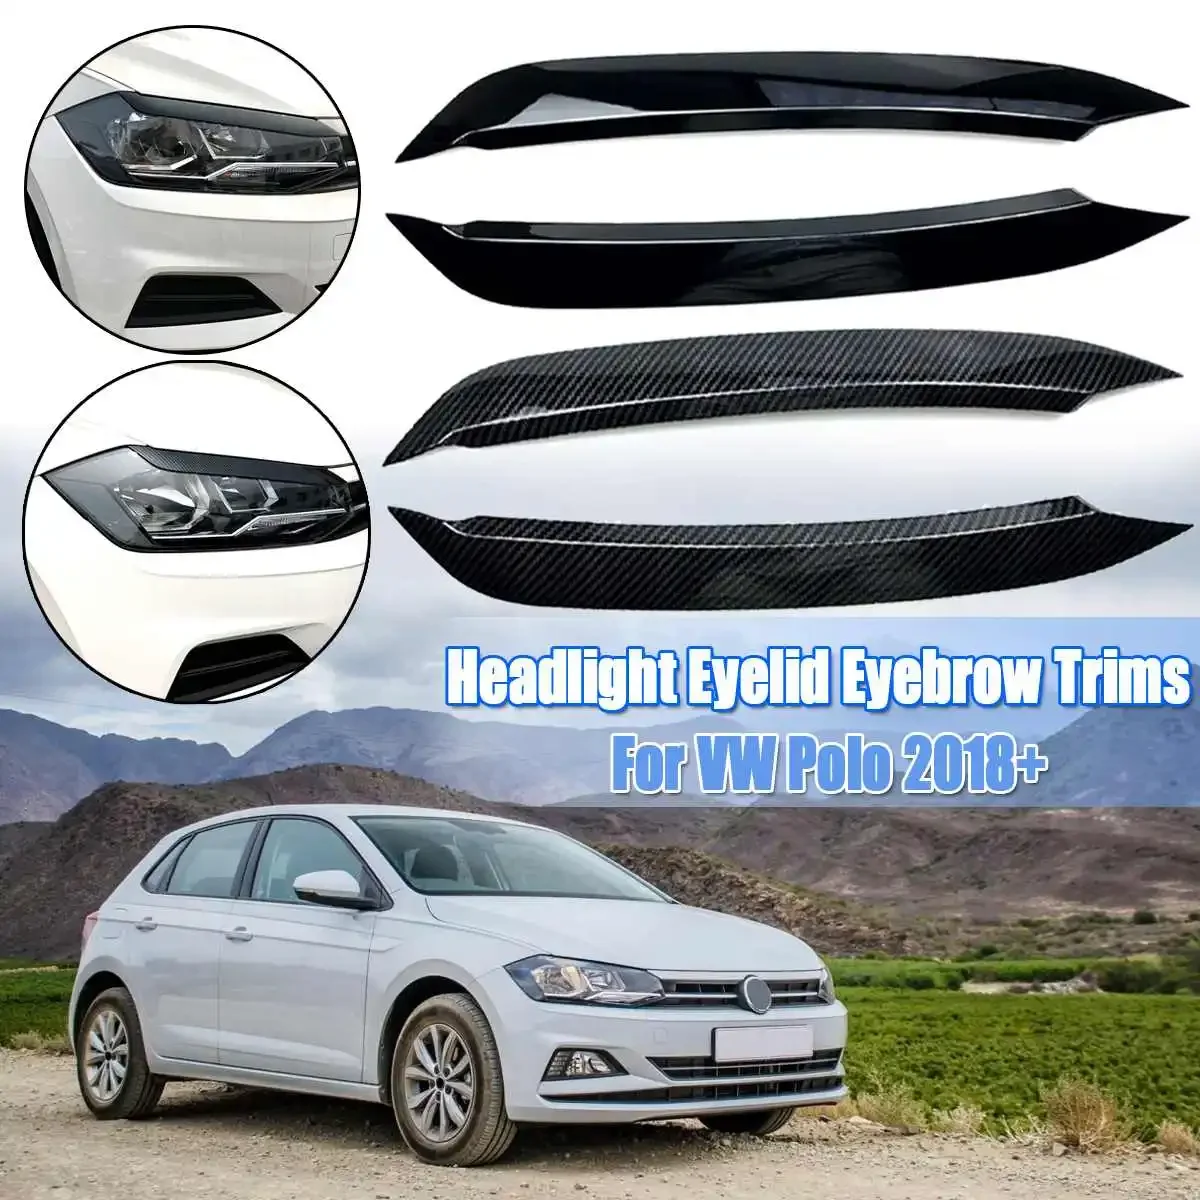 

Pair Car Headlights Eyelids Eyebrow ABS Trim Stickers Cover For VW for Polo 2018+ Rear Window Side Spoilers Glossy Canard Canard